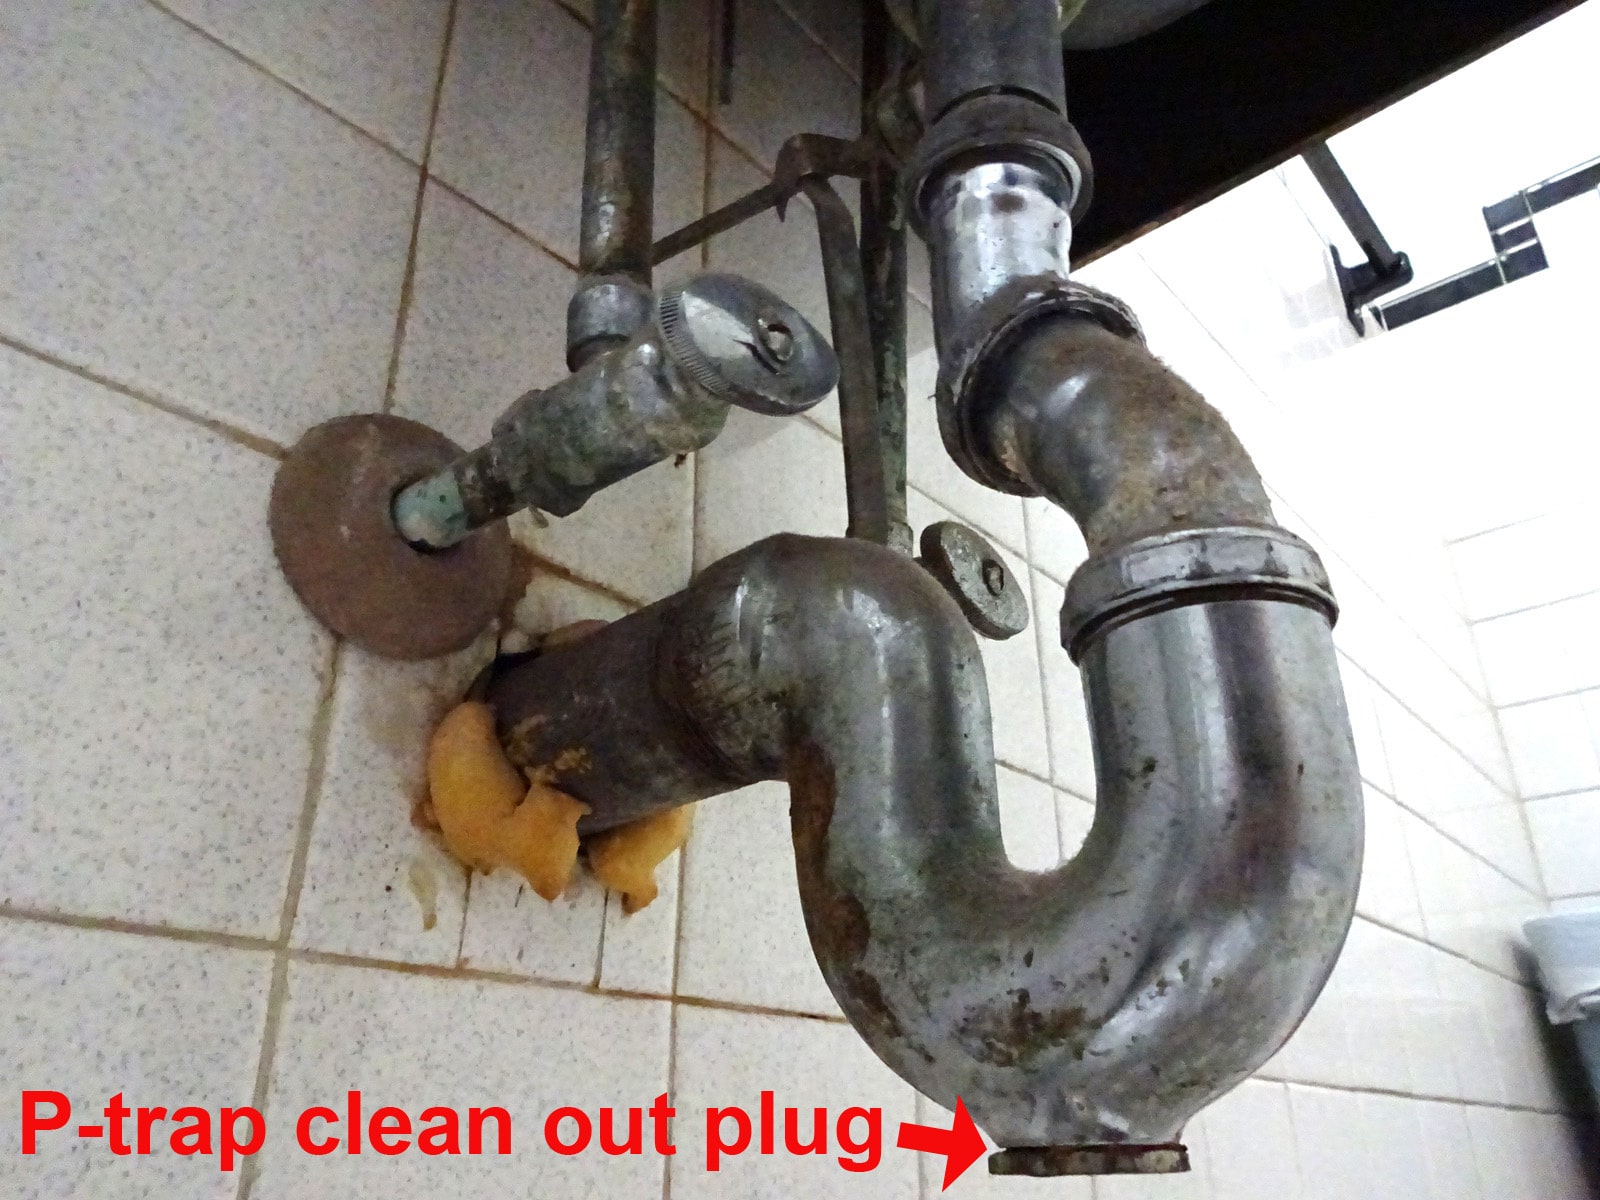 how to fix a clogged sink